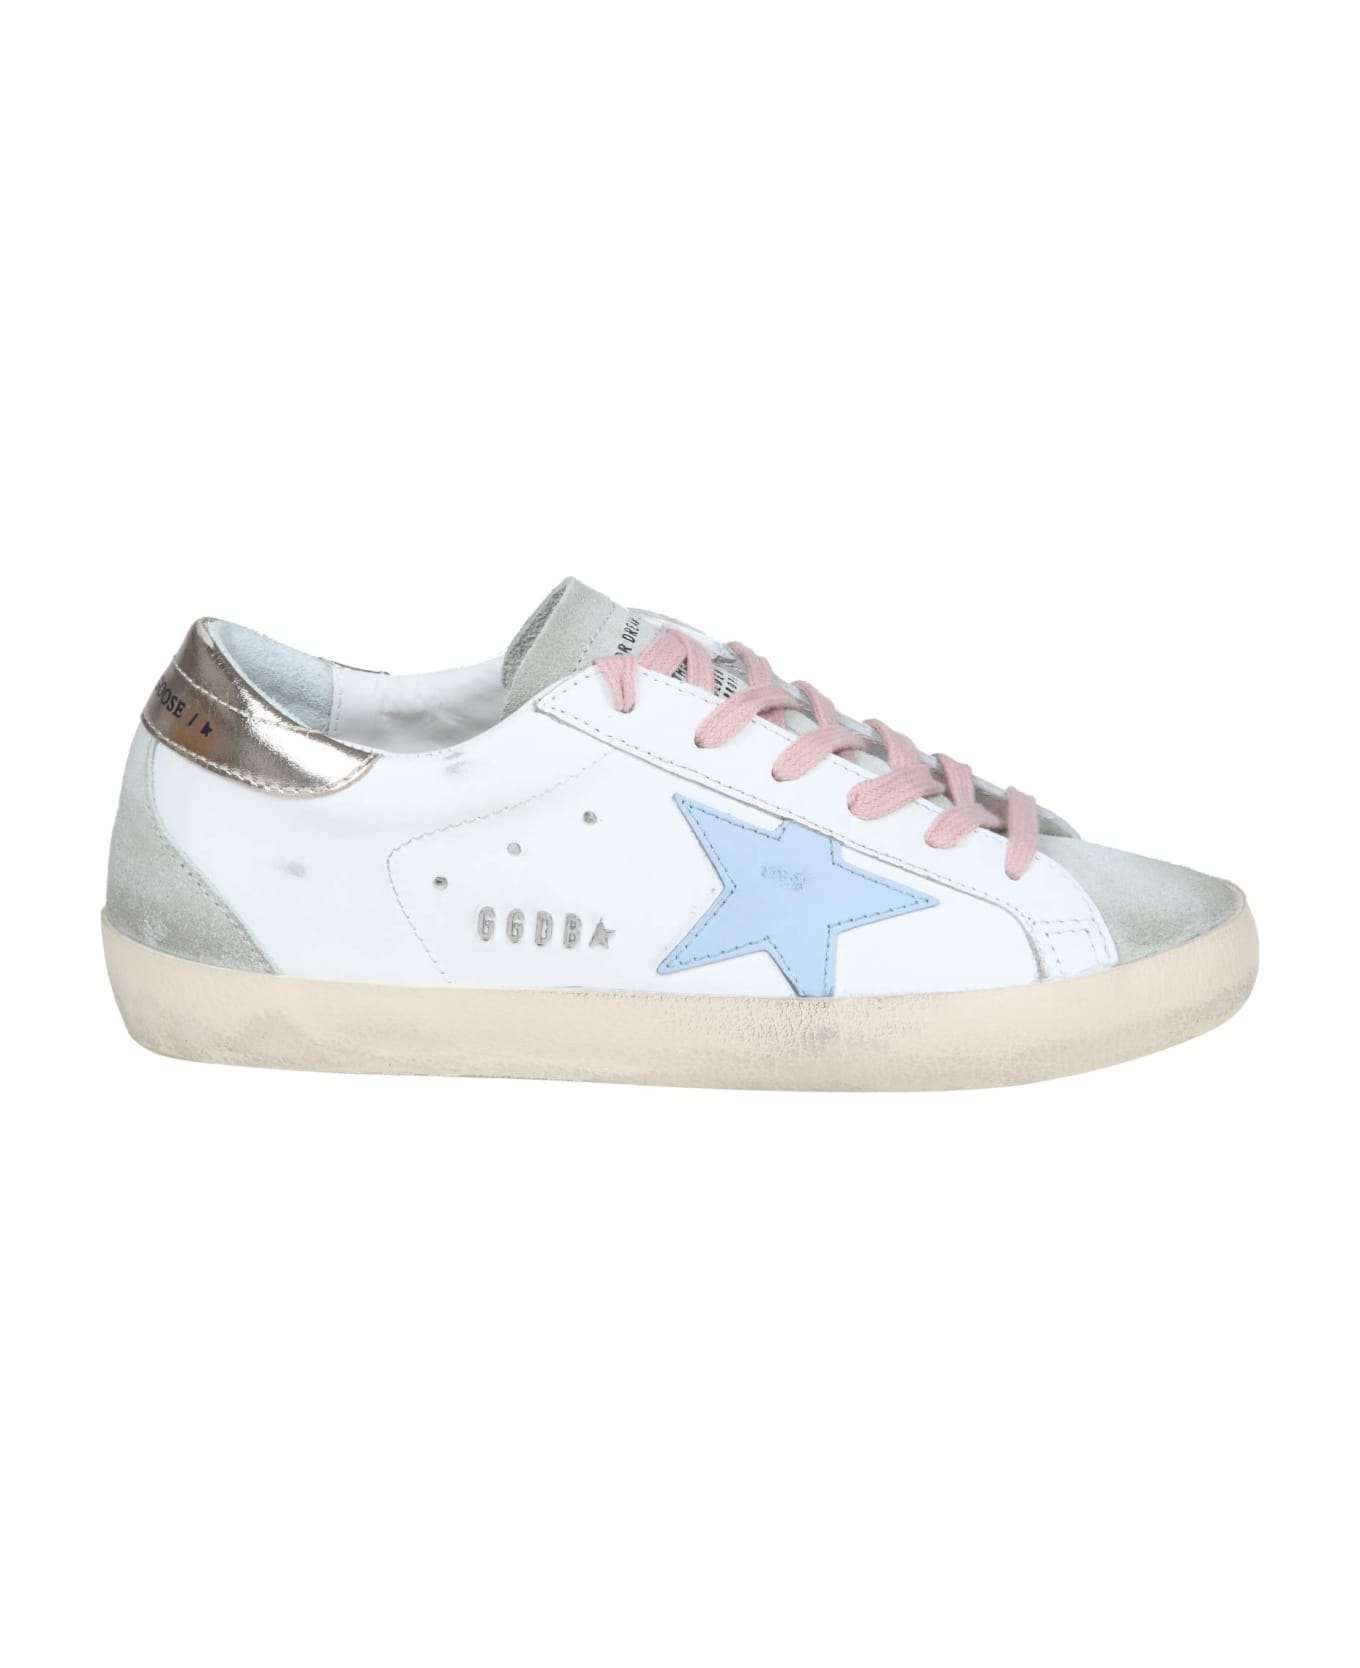 Golden Goose Super Star Sneakers In White Leather - White/Platinum